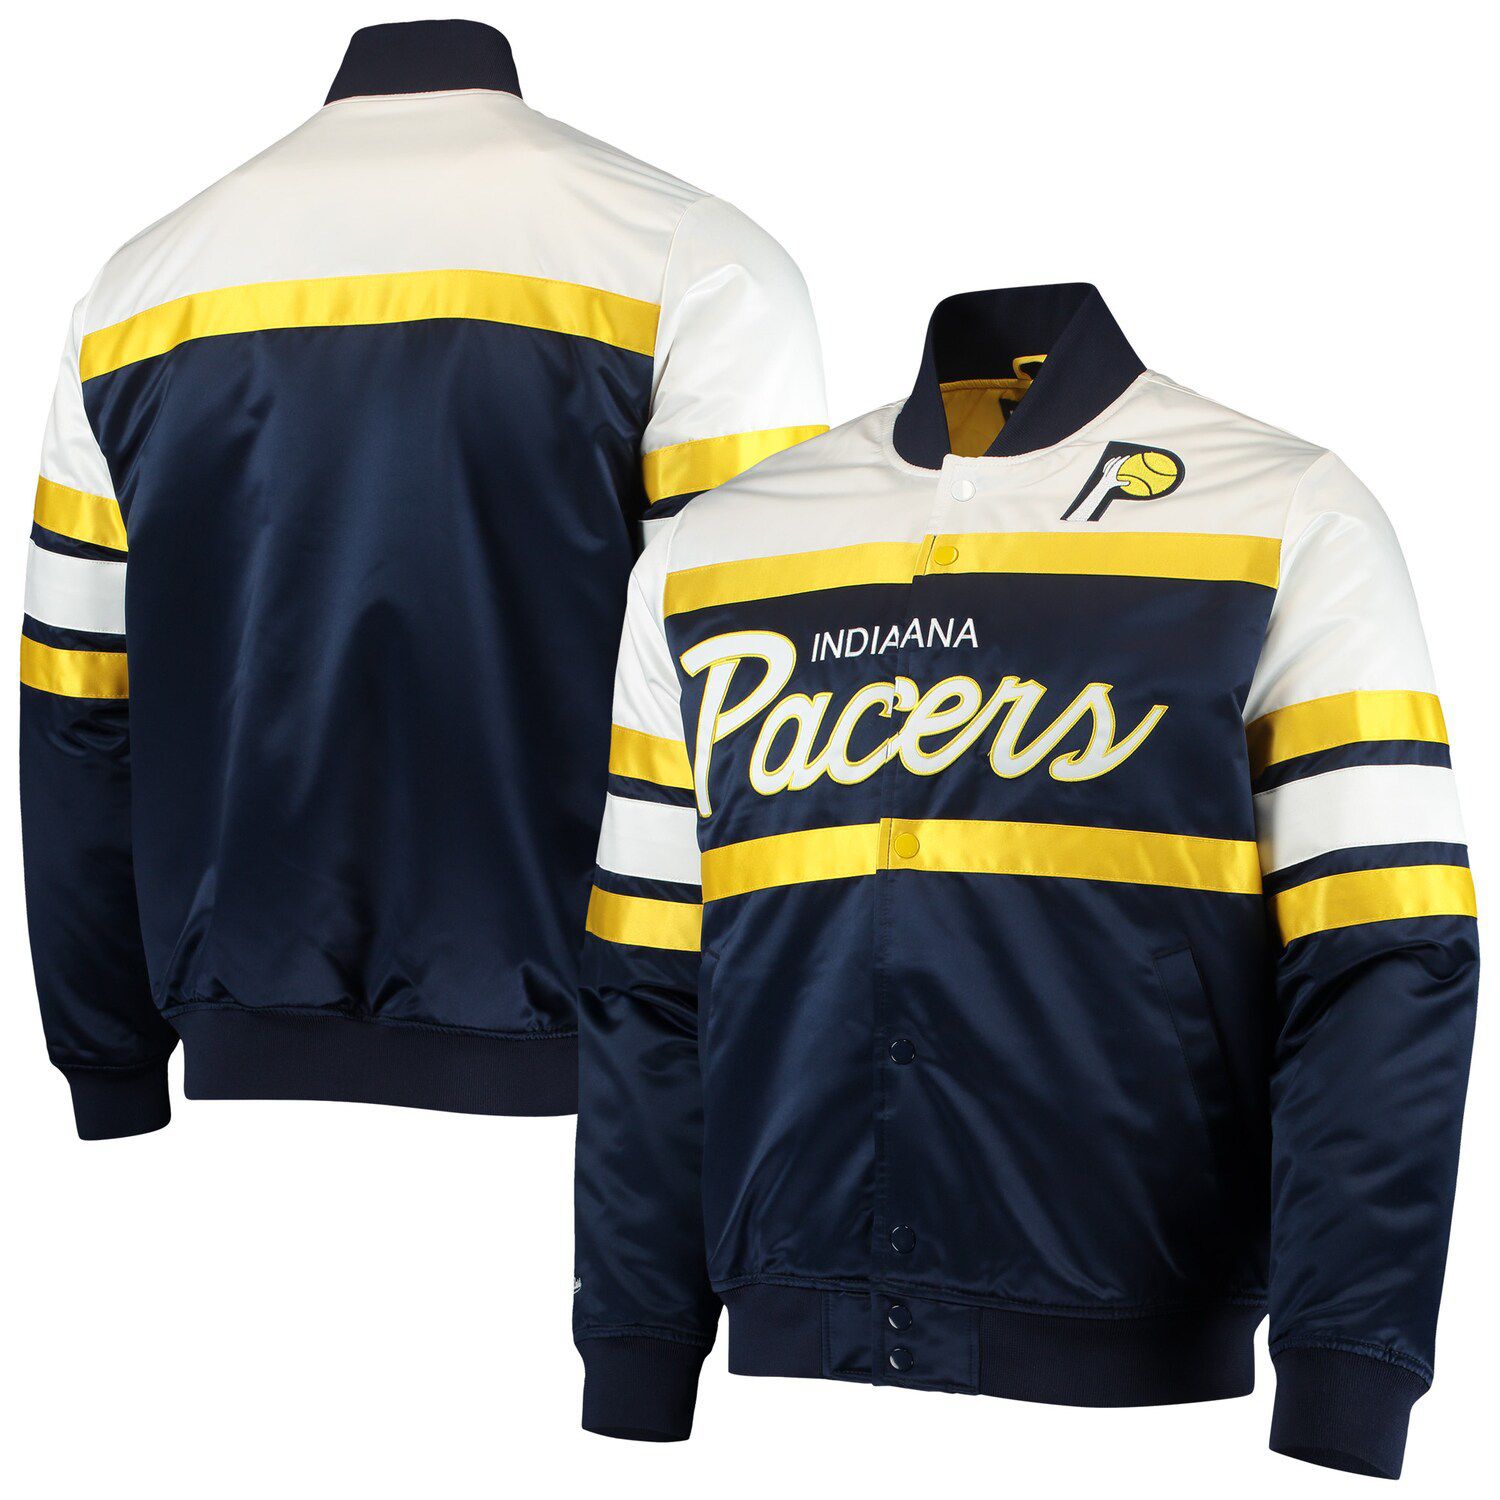 Image for Unbranded Men's Mitchell & Ness Navy Indiana Pacers Hardwood Classics Script Satin Full-Snap Jacket at Kohl's.